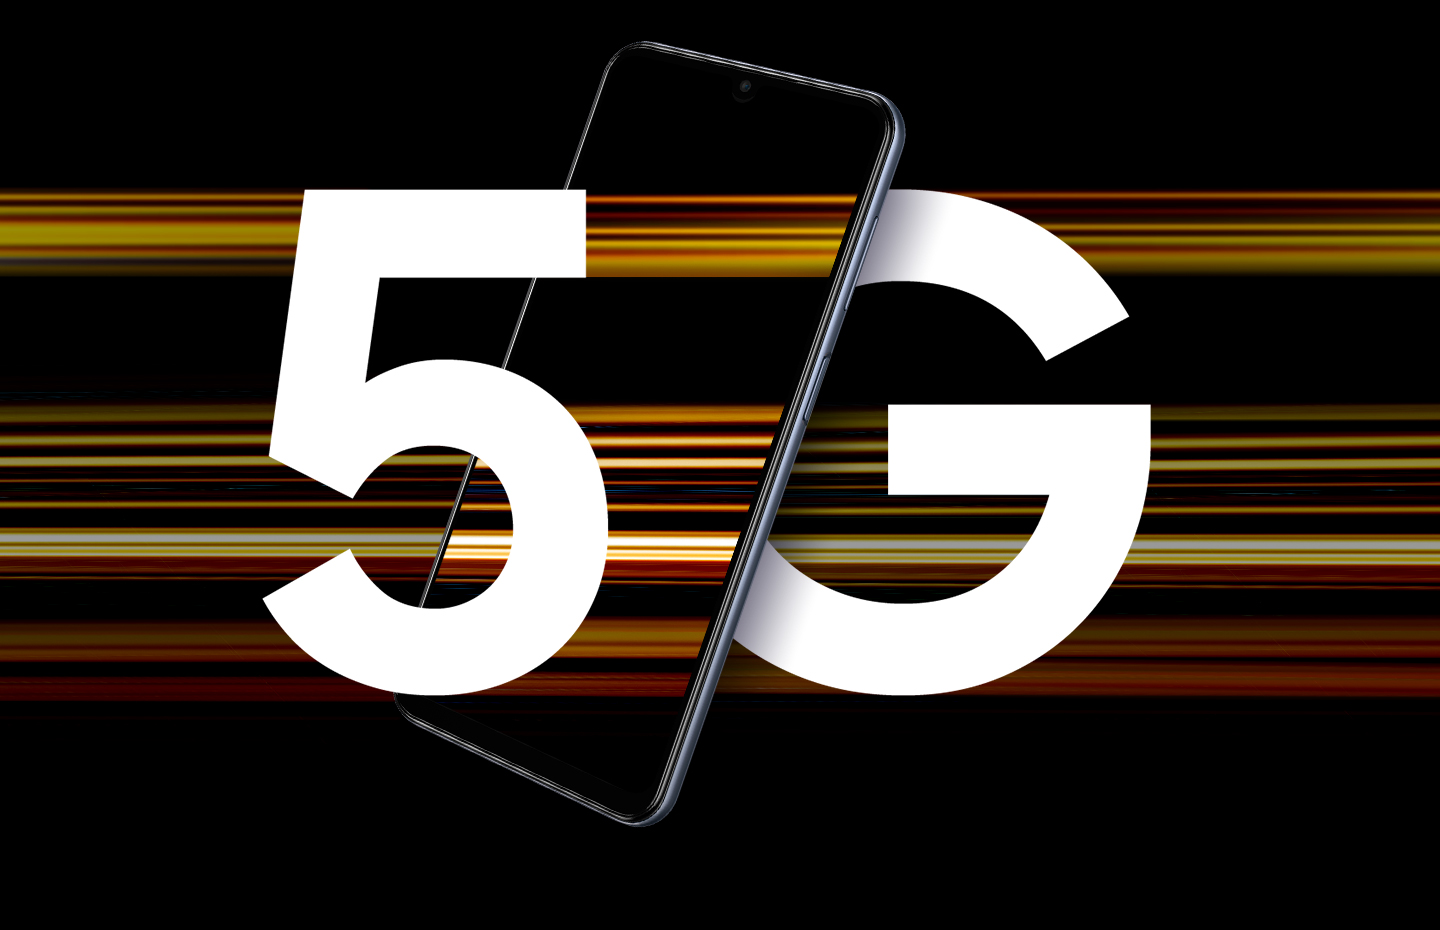 A Galaxy M33 5G device is shown with the text 5G divided at the letters by the device. Colorful streaks of light surround it to represent fast 5G speeds.